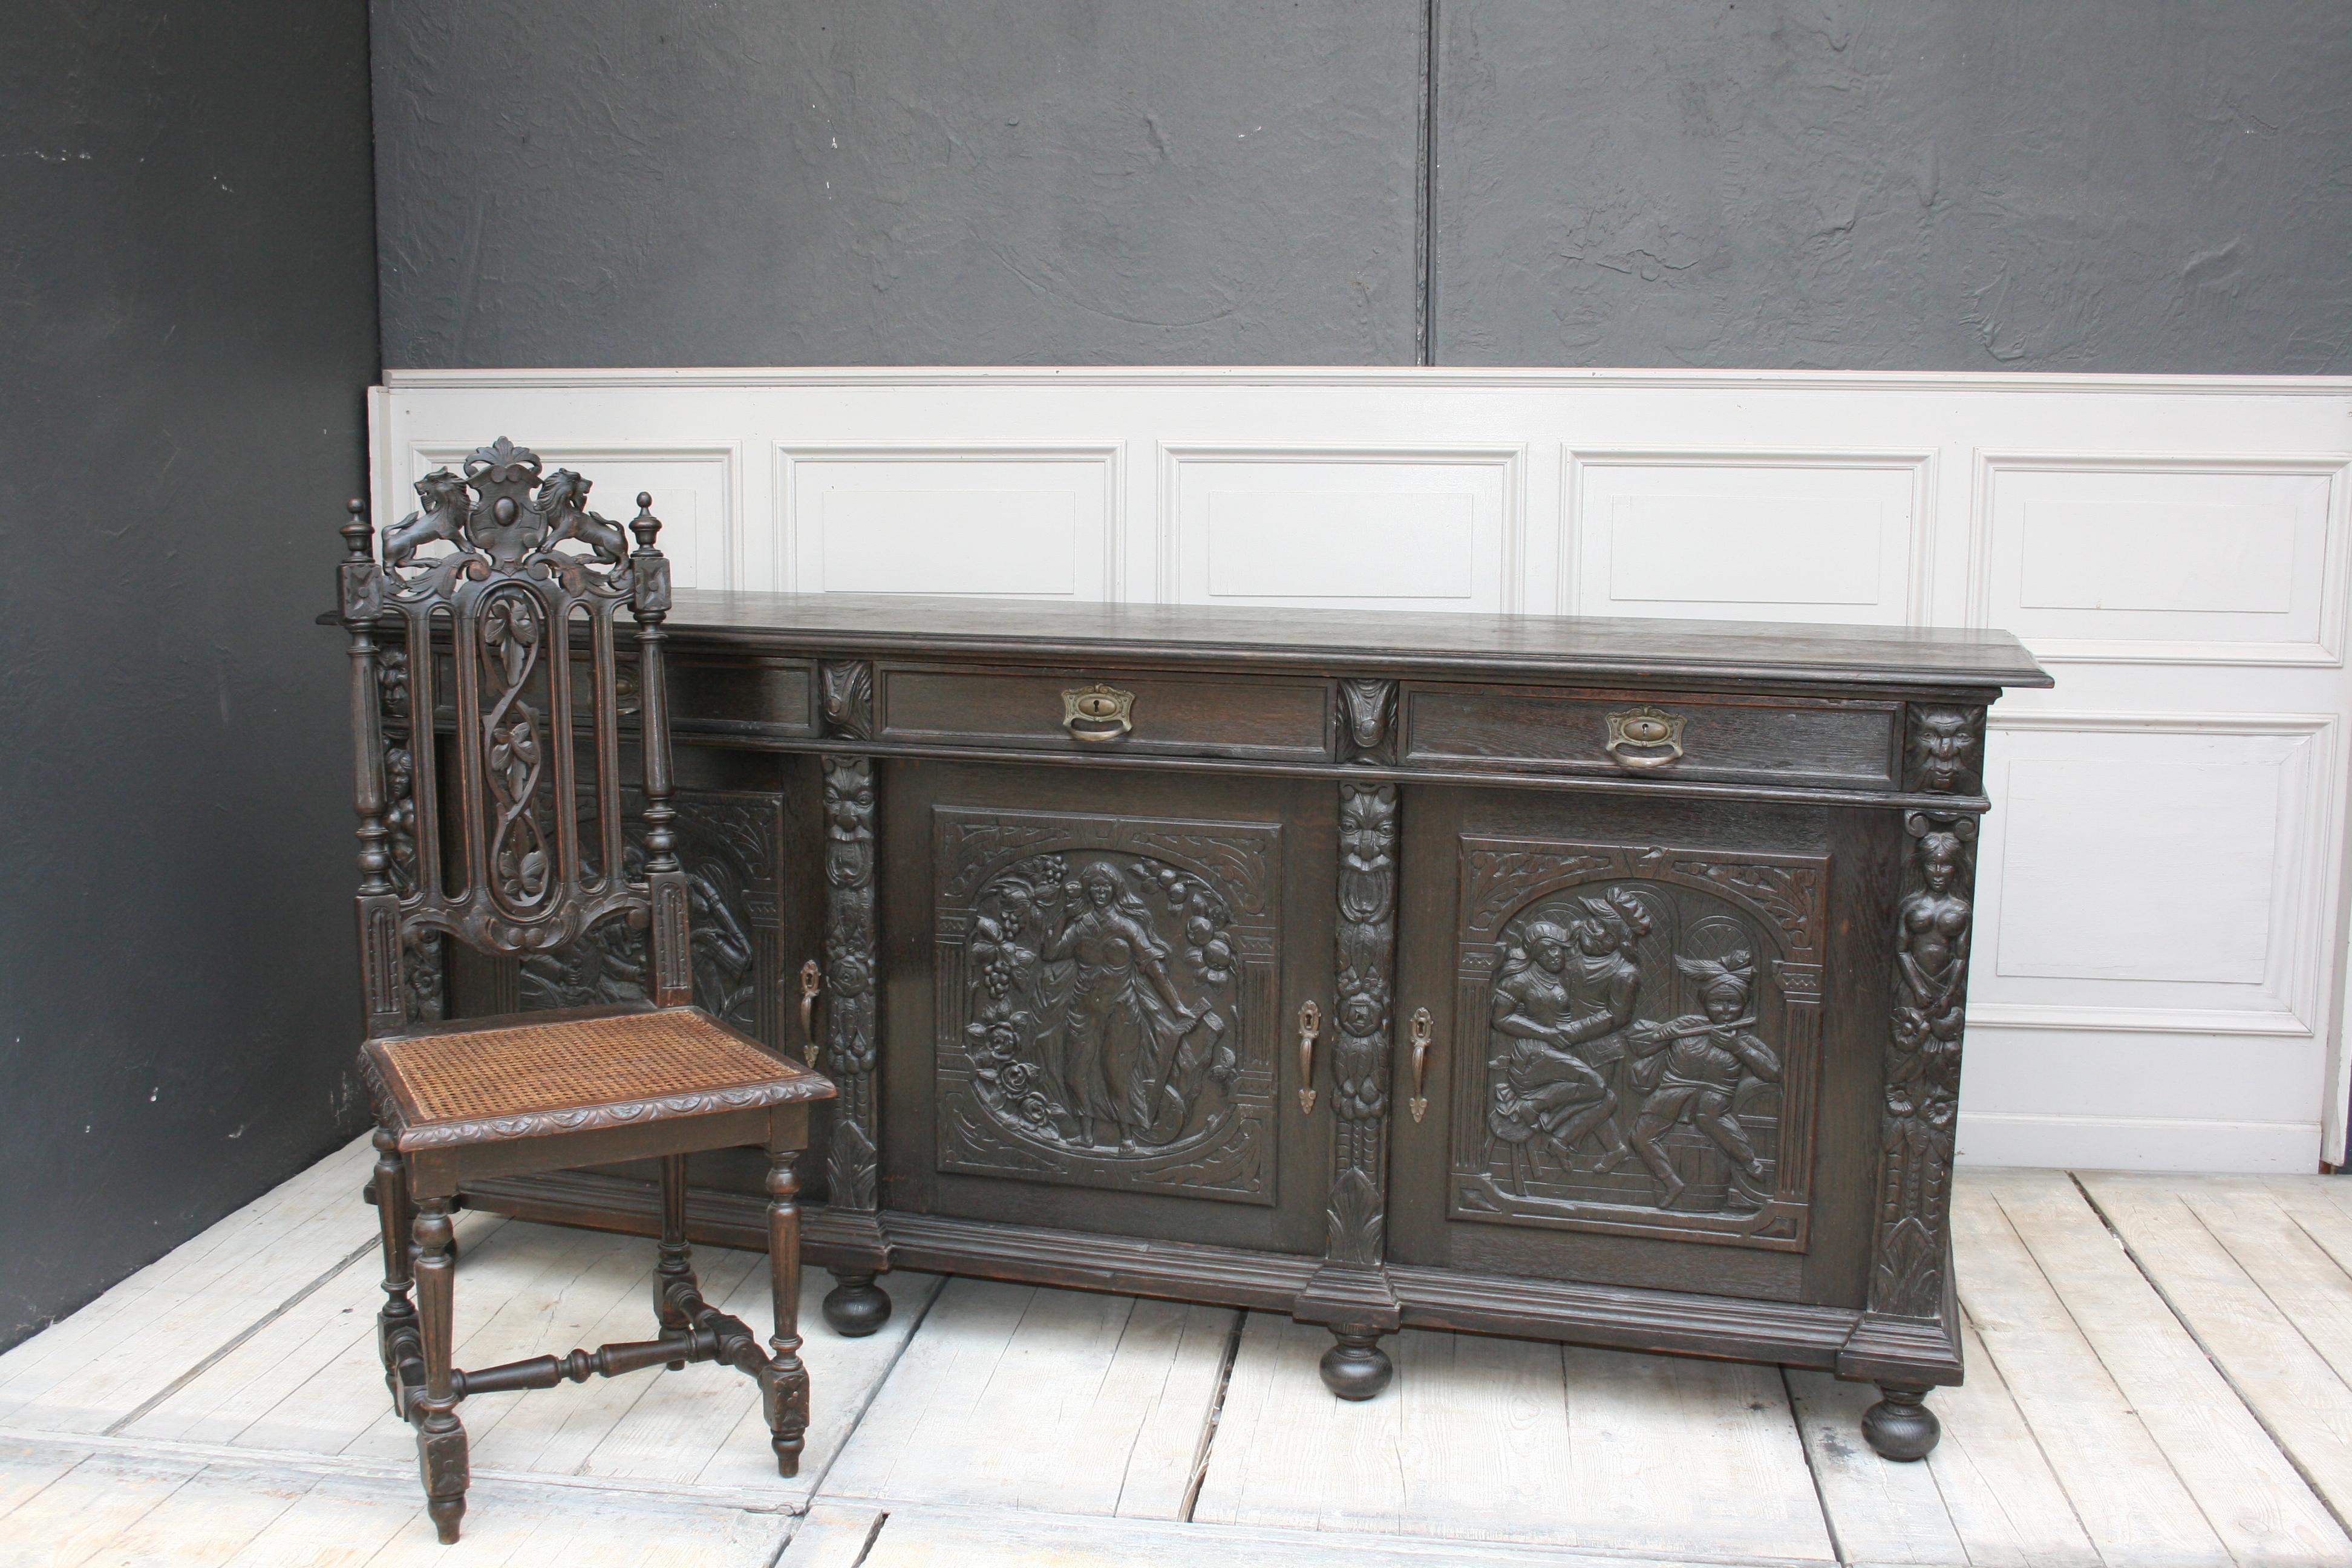 Antique black oak sideboard/credenza with 3 doors and 3 drawers. From the time of historicism, circa 1880. 
Original fittings and handles. Many carved ornaments, including scenes of drinking and dancing people or even grotesque grimaces. Origin: